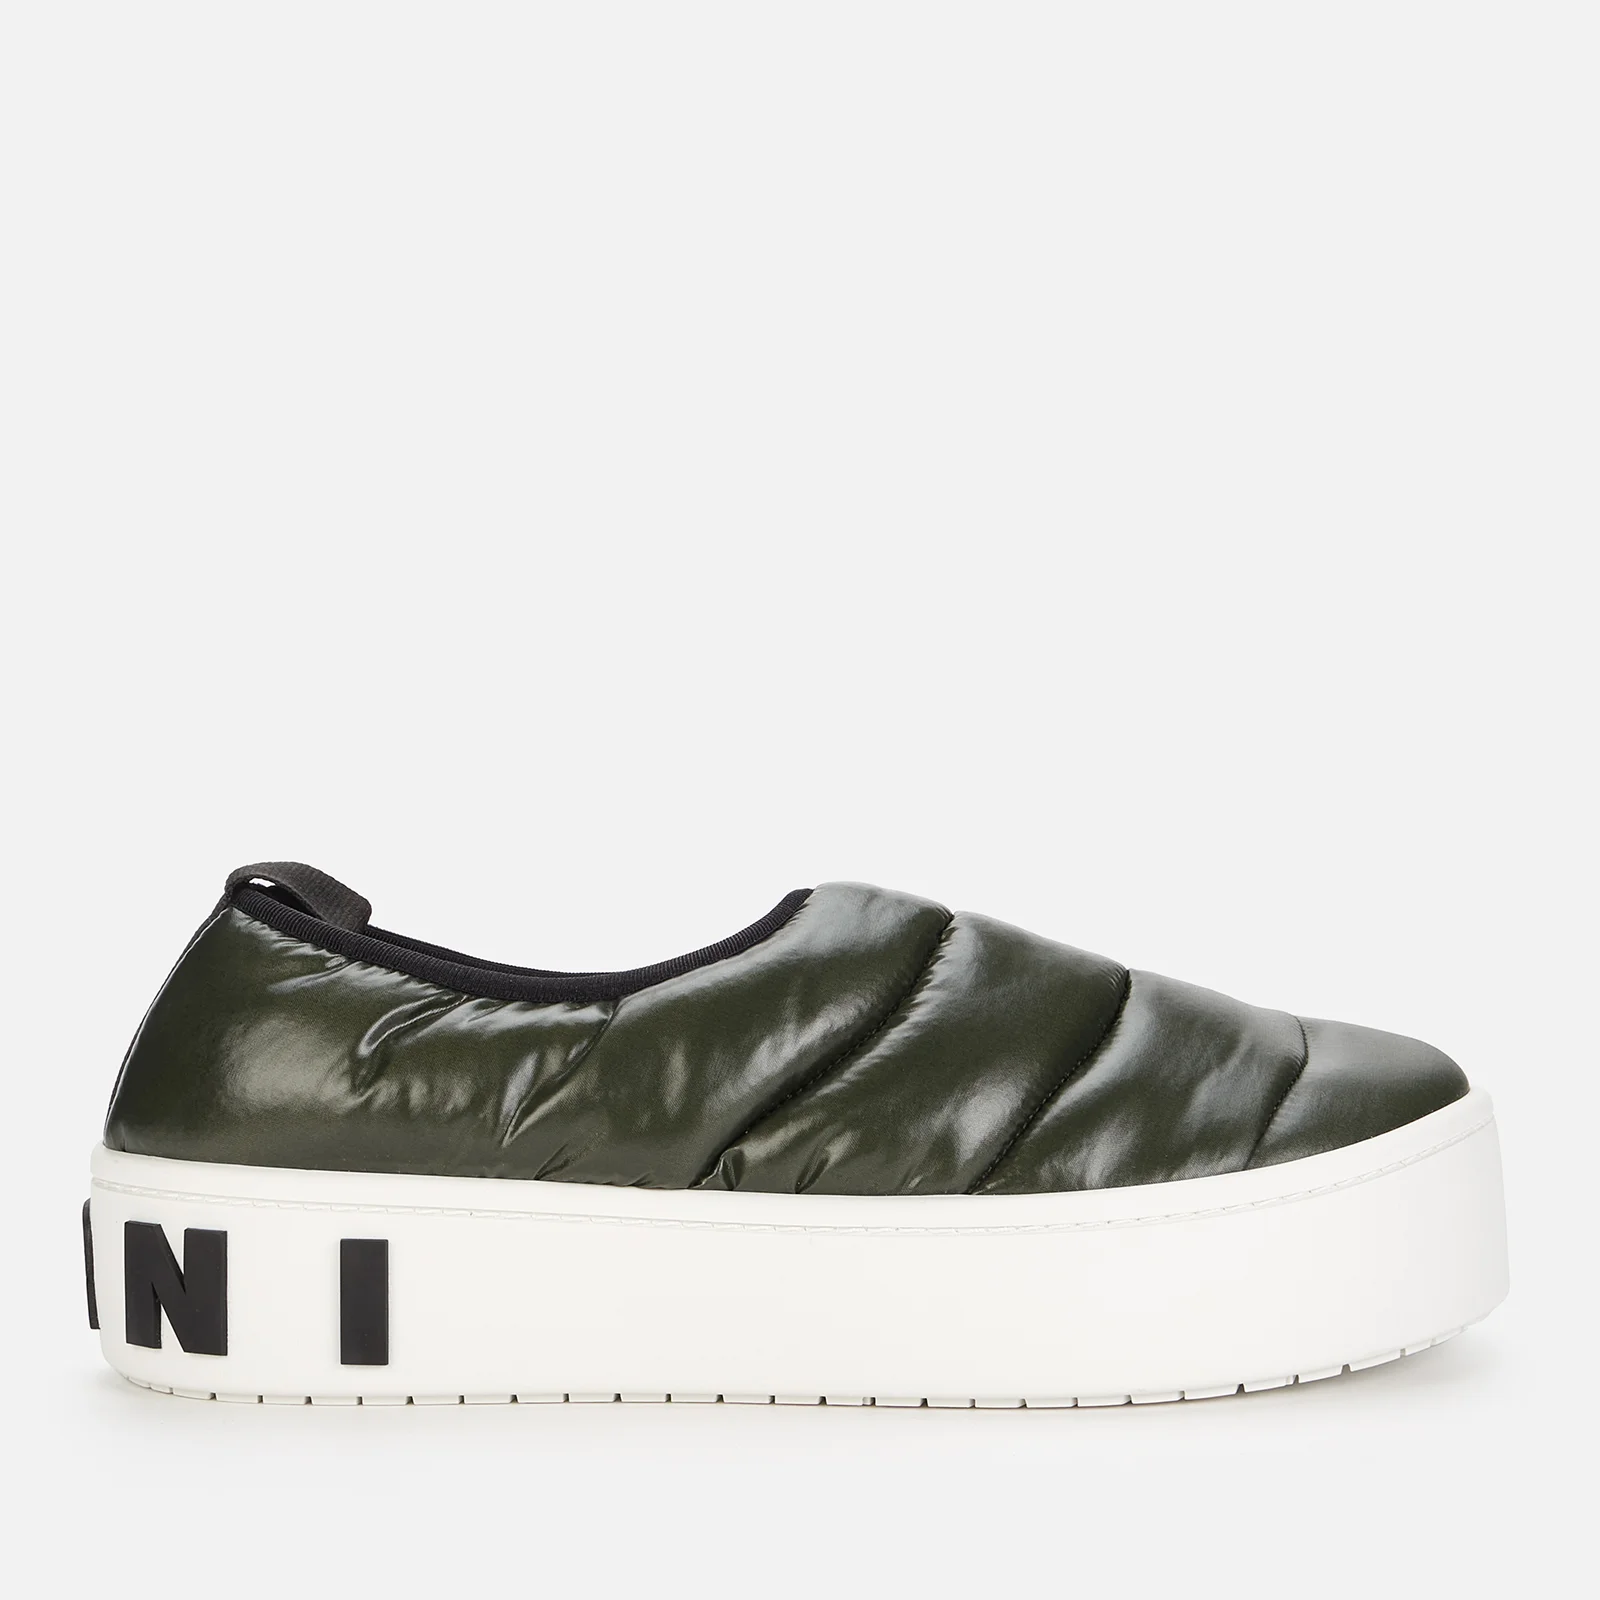 Marni Men's Slip On Sneakers - Forest Night Image 1